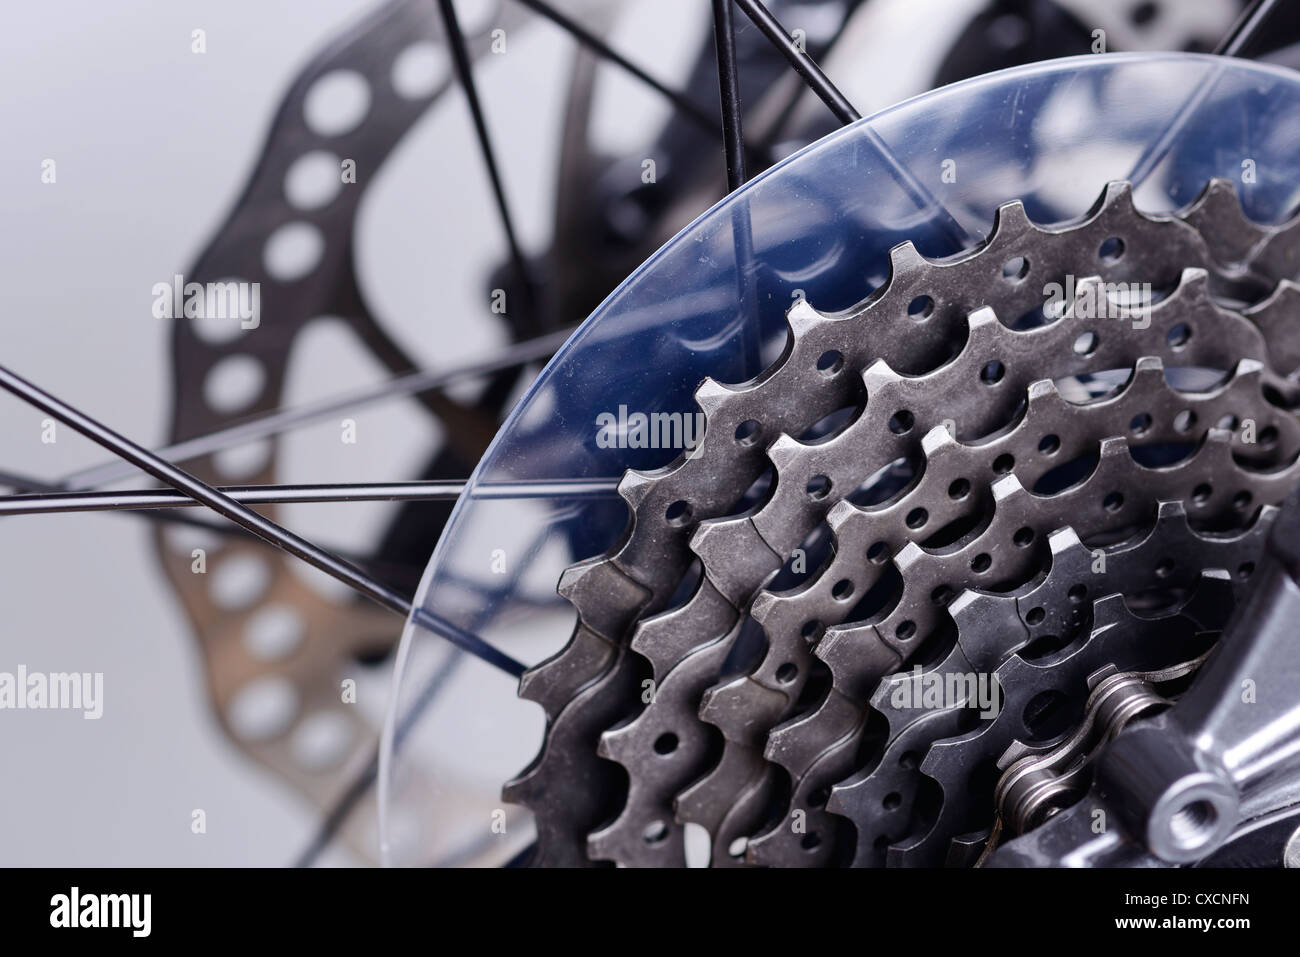 Close up detail of a bicycle rear gears and disc brakes Stock Photo